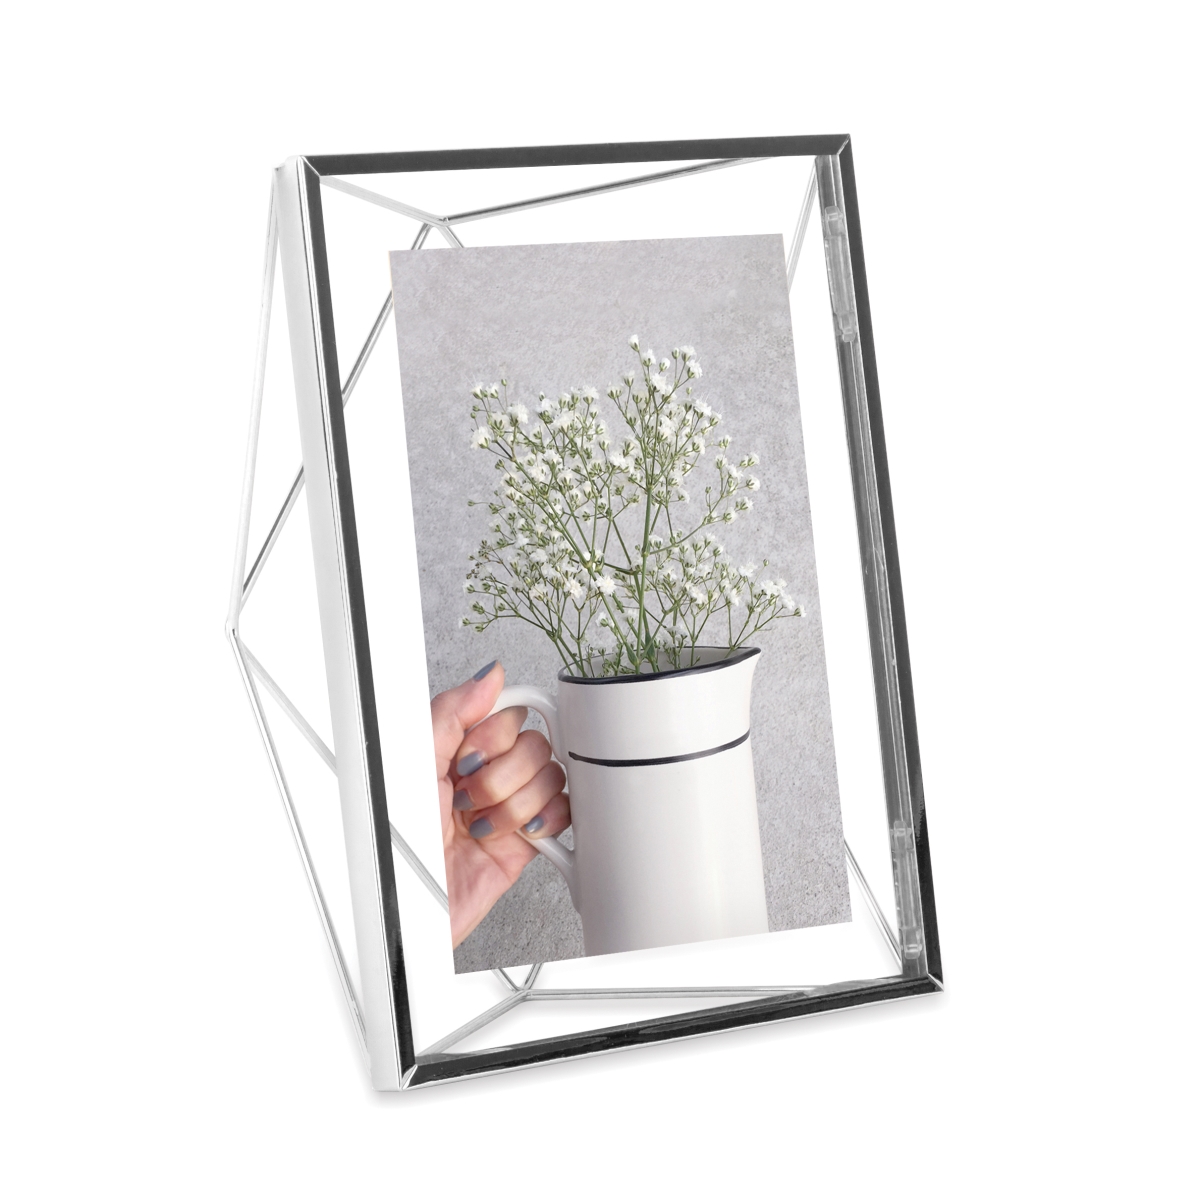 313015-158 5 X 7 In. Prisma Picture Frame Floating Wall Or Desk Photo Display - Chrome